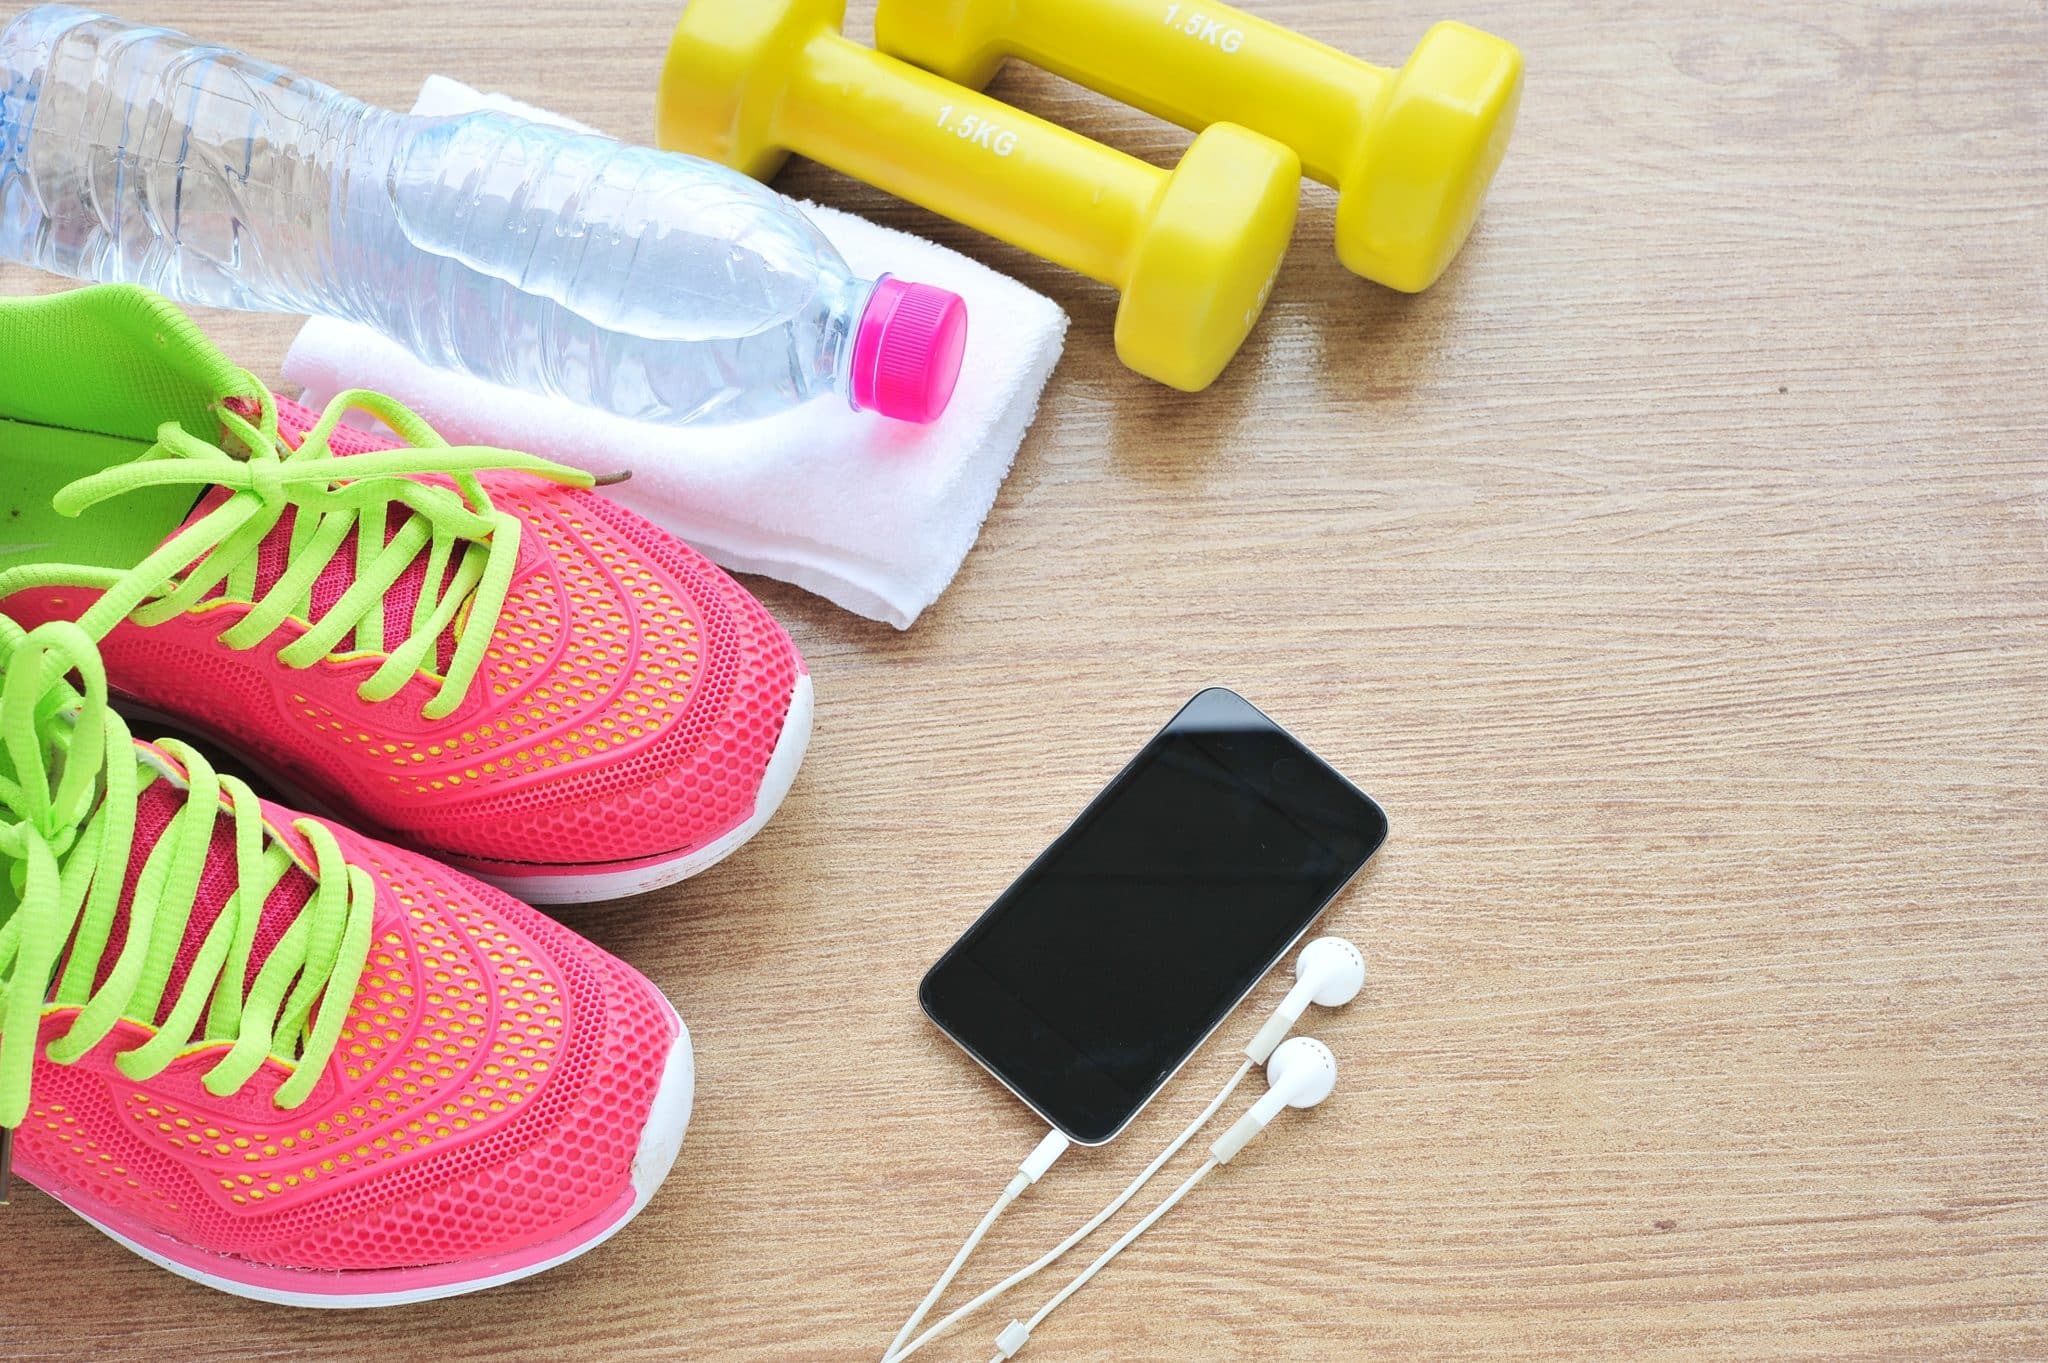 A group of items on the floor, including a pair of pink and green running shoes, a water bottle, two yellow dumbbells, and a smartphone with attached headphones.